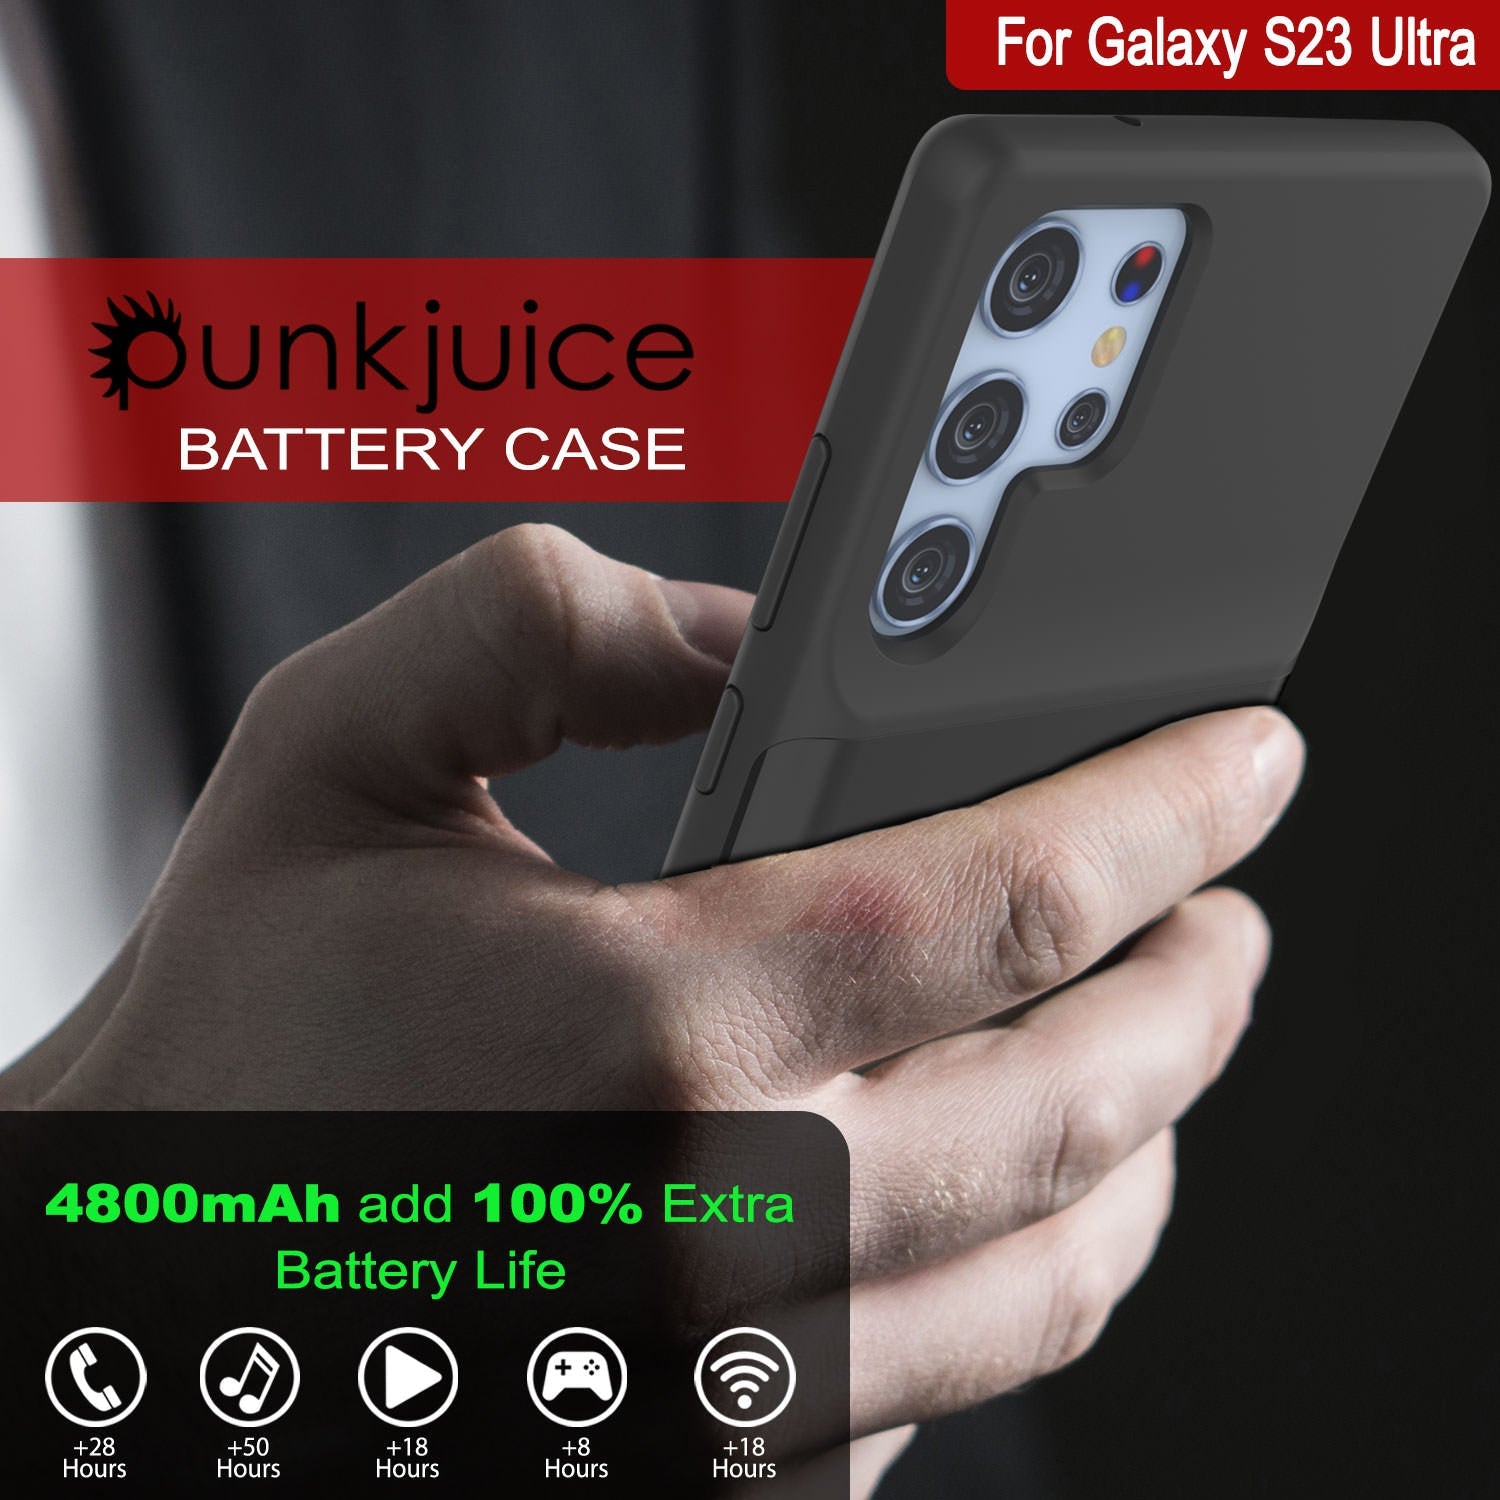 PunkJuice S23 Ultra Battery Case Black - Portable Charging Power Juice Bank with 4800mAh